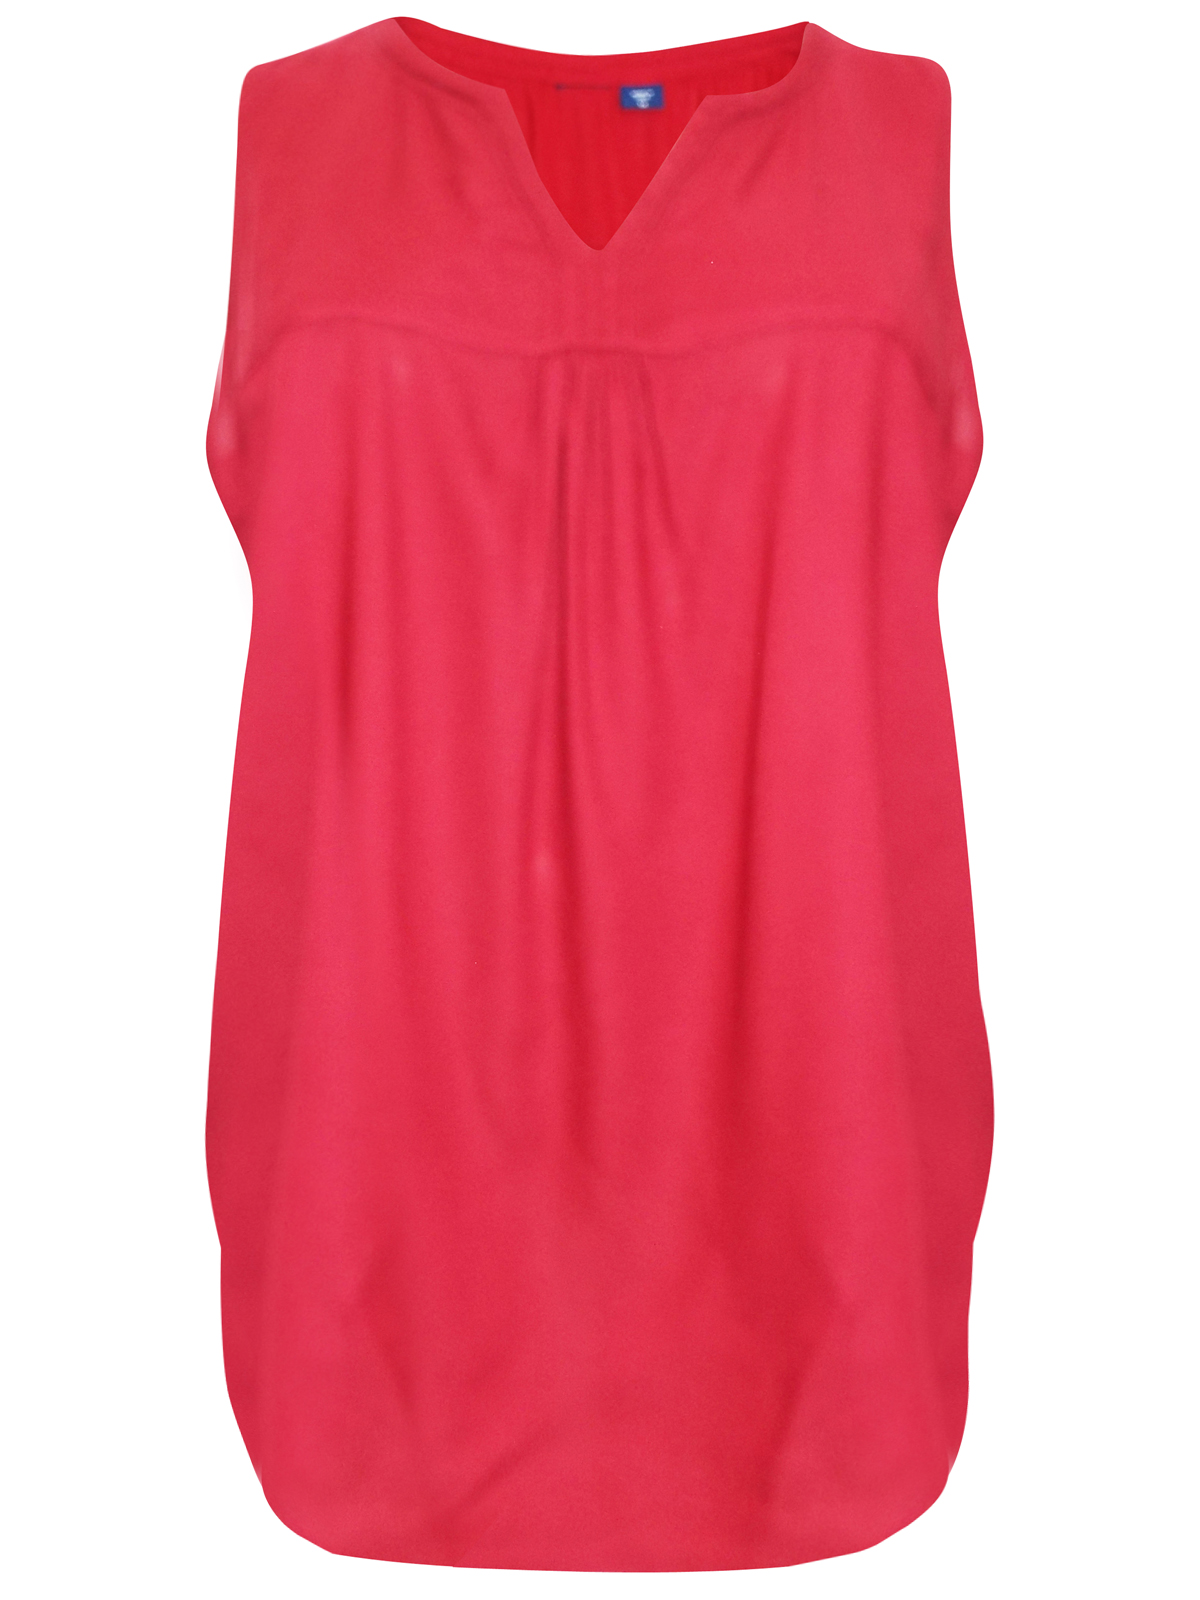 Plus Sizes Ladies Clothing by Basic Editions - - Basic Editions RED ...